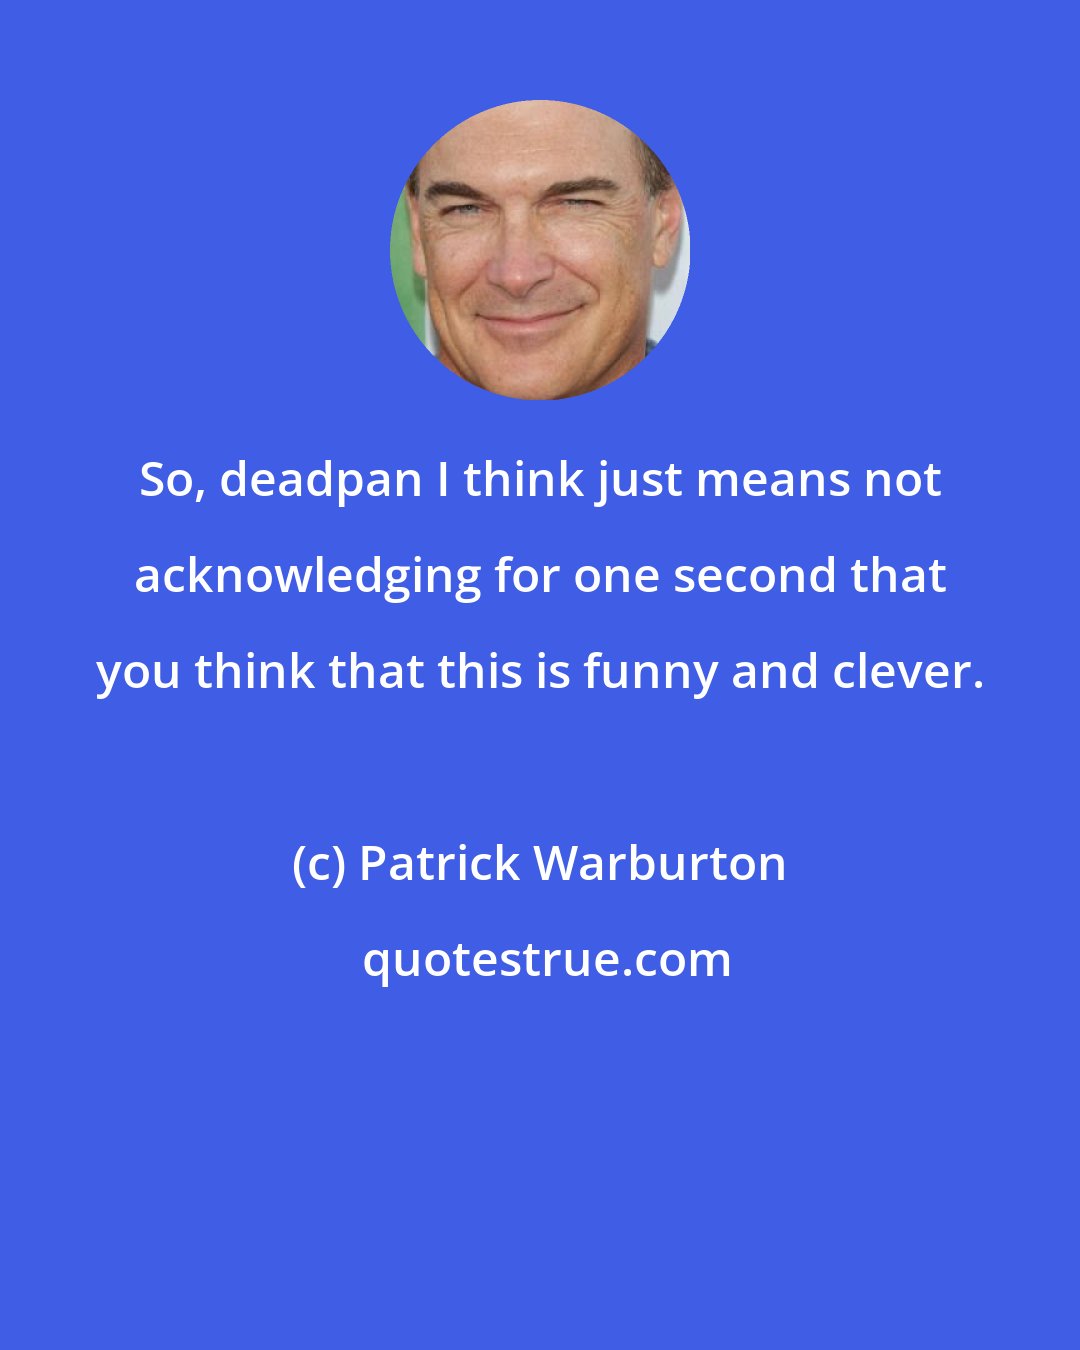 Patrick Warburton: So, deadpan I think just means not acknowledging for one second that you think that this is funny and clever.